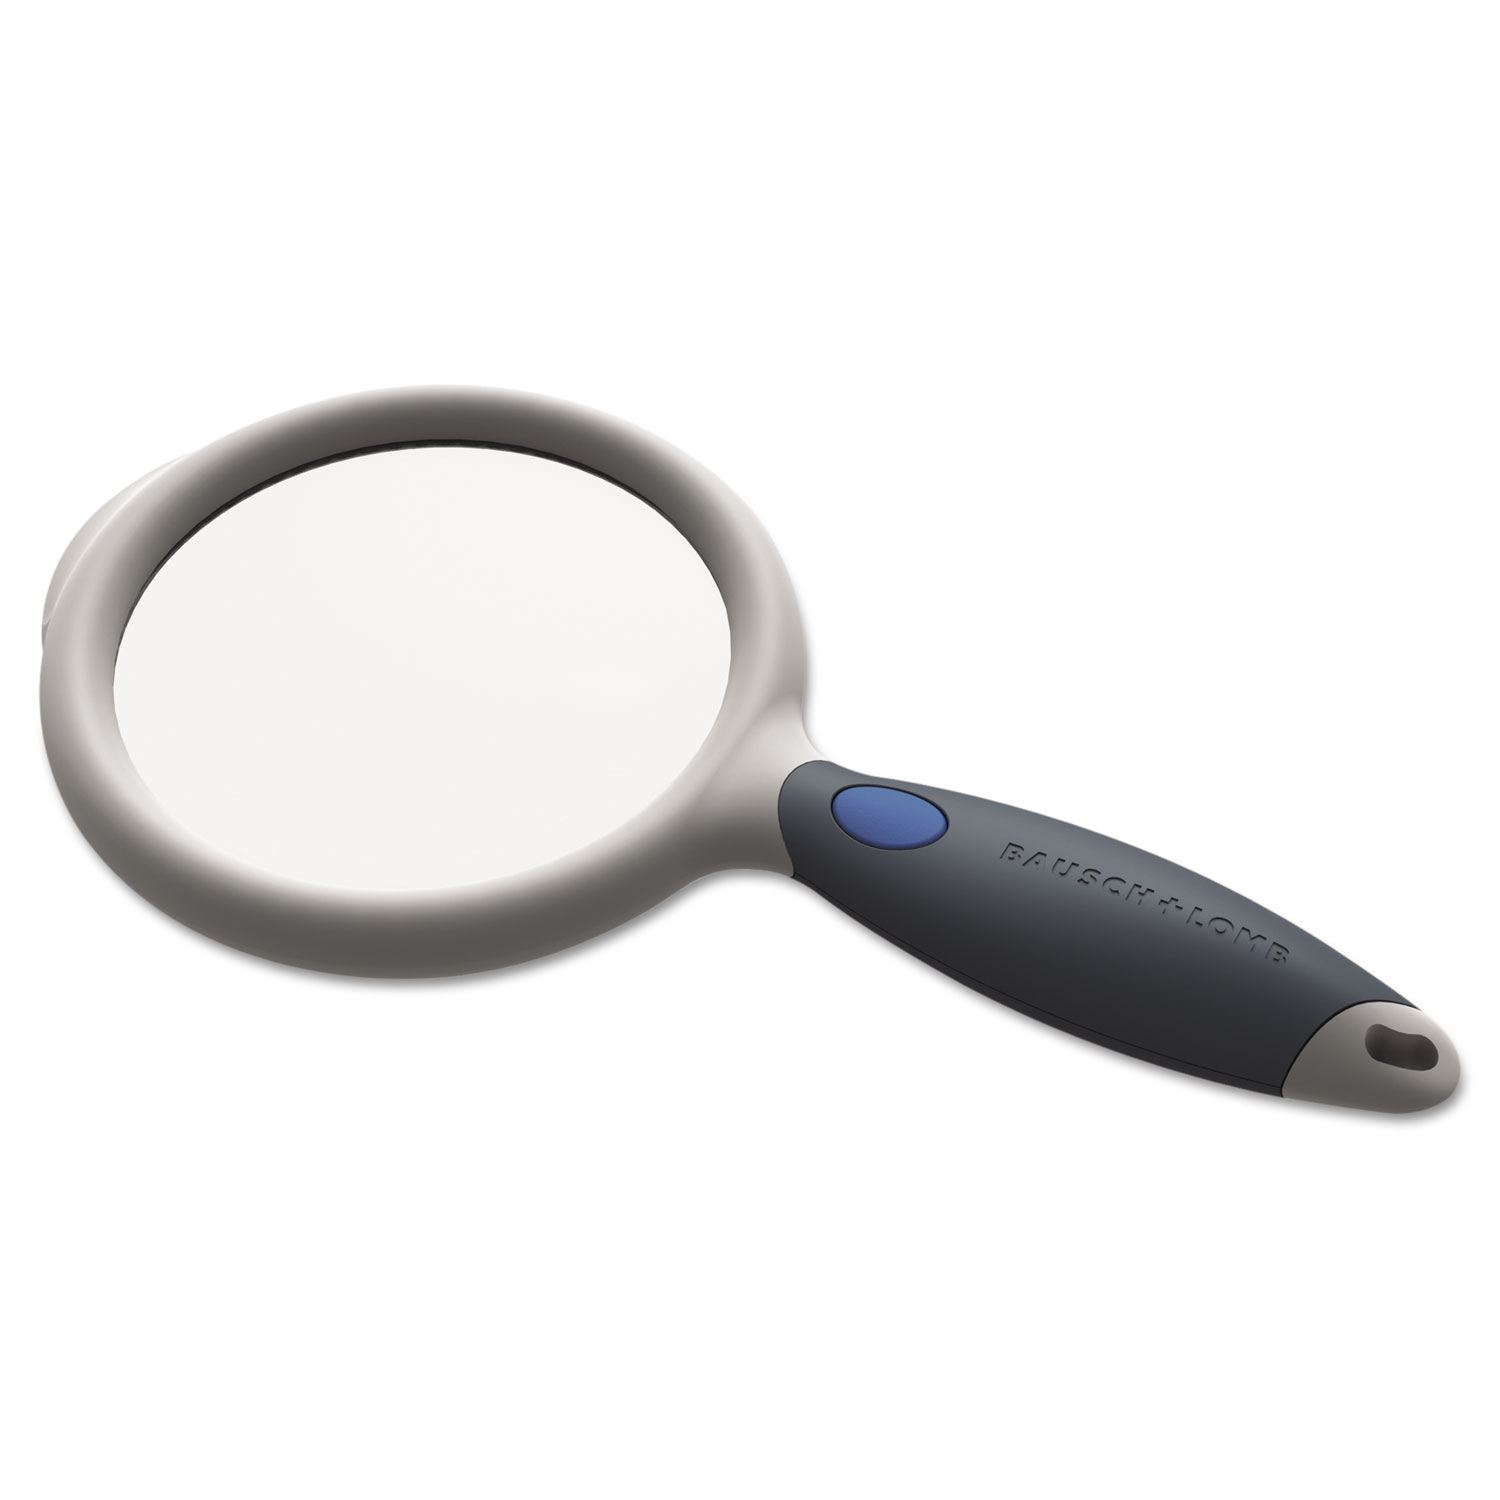  Bausch & Lomb 628003 Handheld LED Magnifier, Round, 4 dia. (BAL628003) 